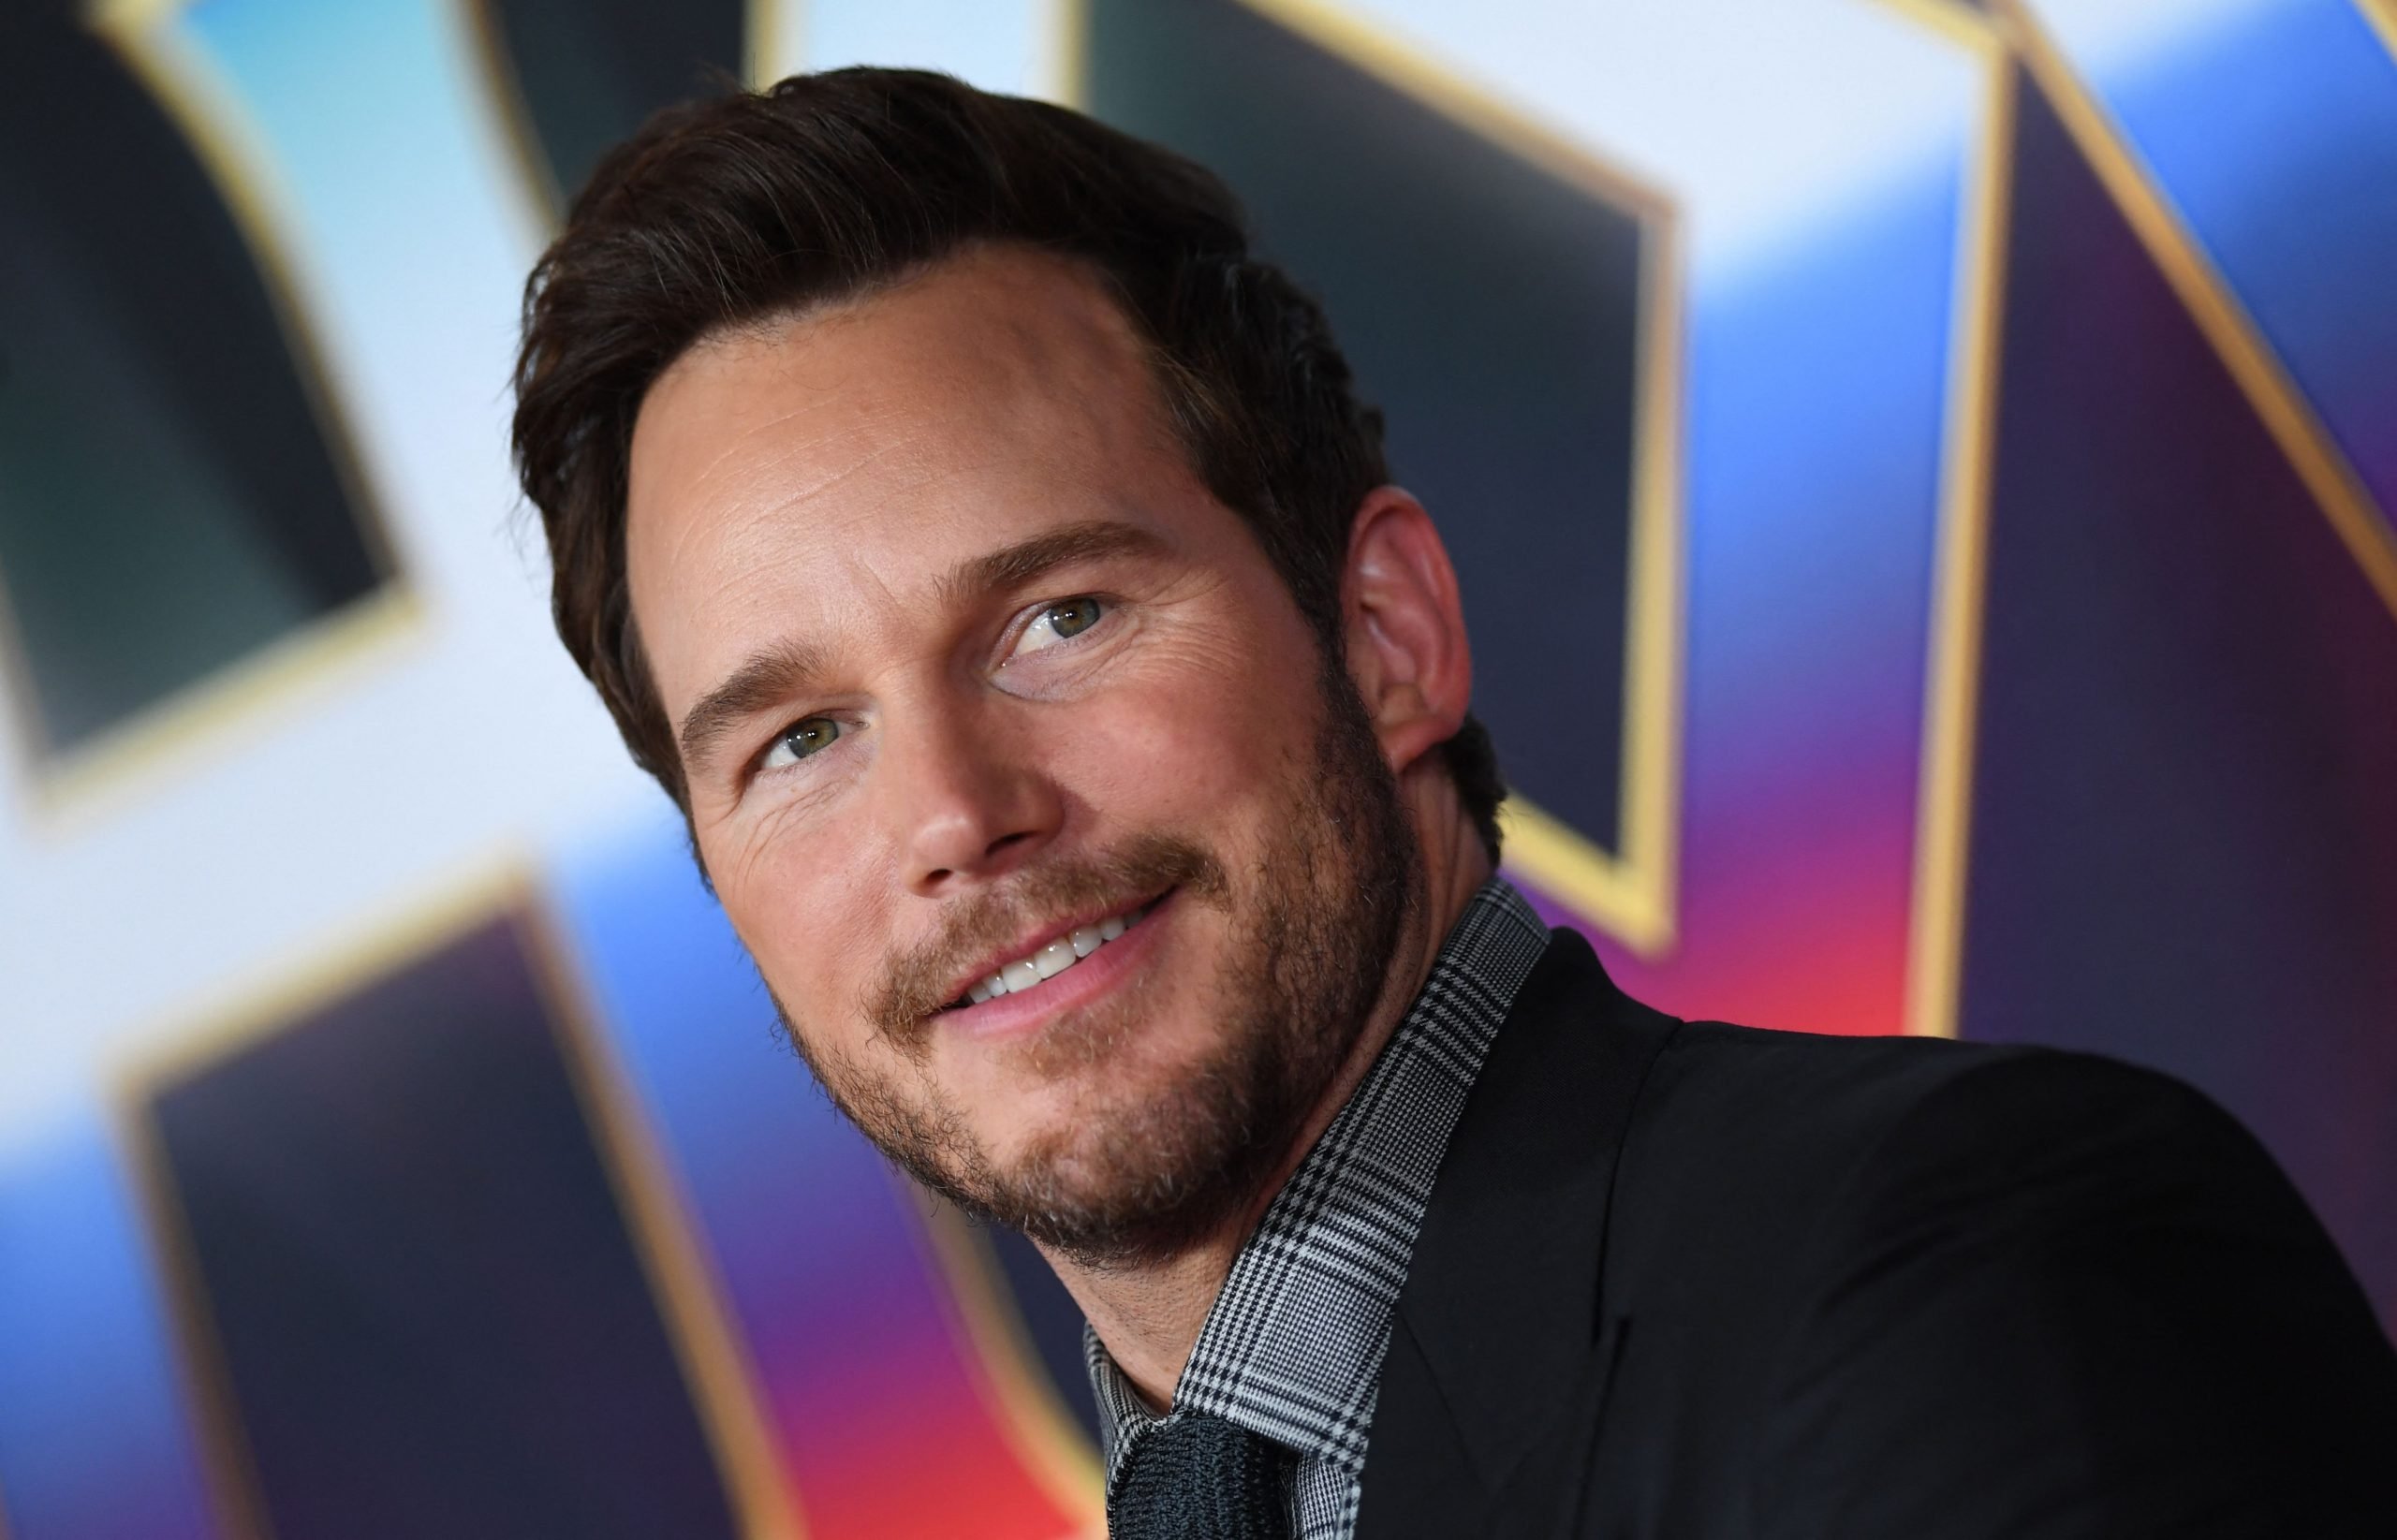 Chris Pratt, who almost played Indiana Jones, attends the premiere of Thor: Love and Thunder in Los Angeles